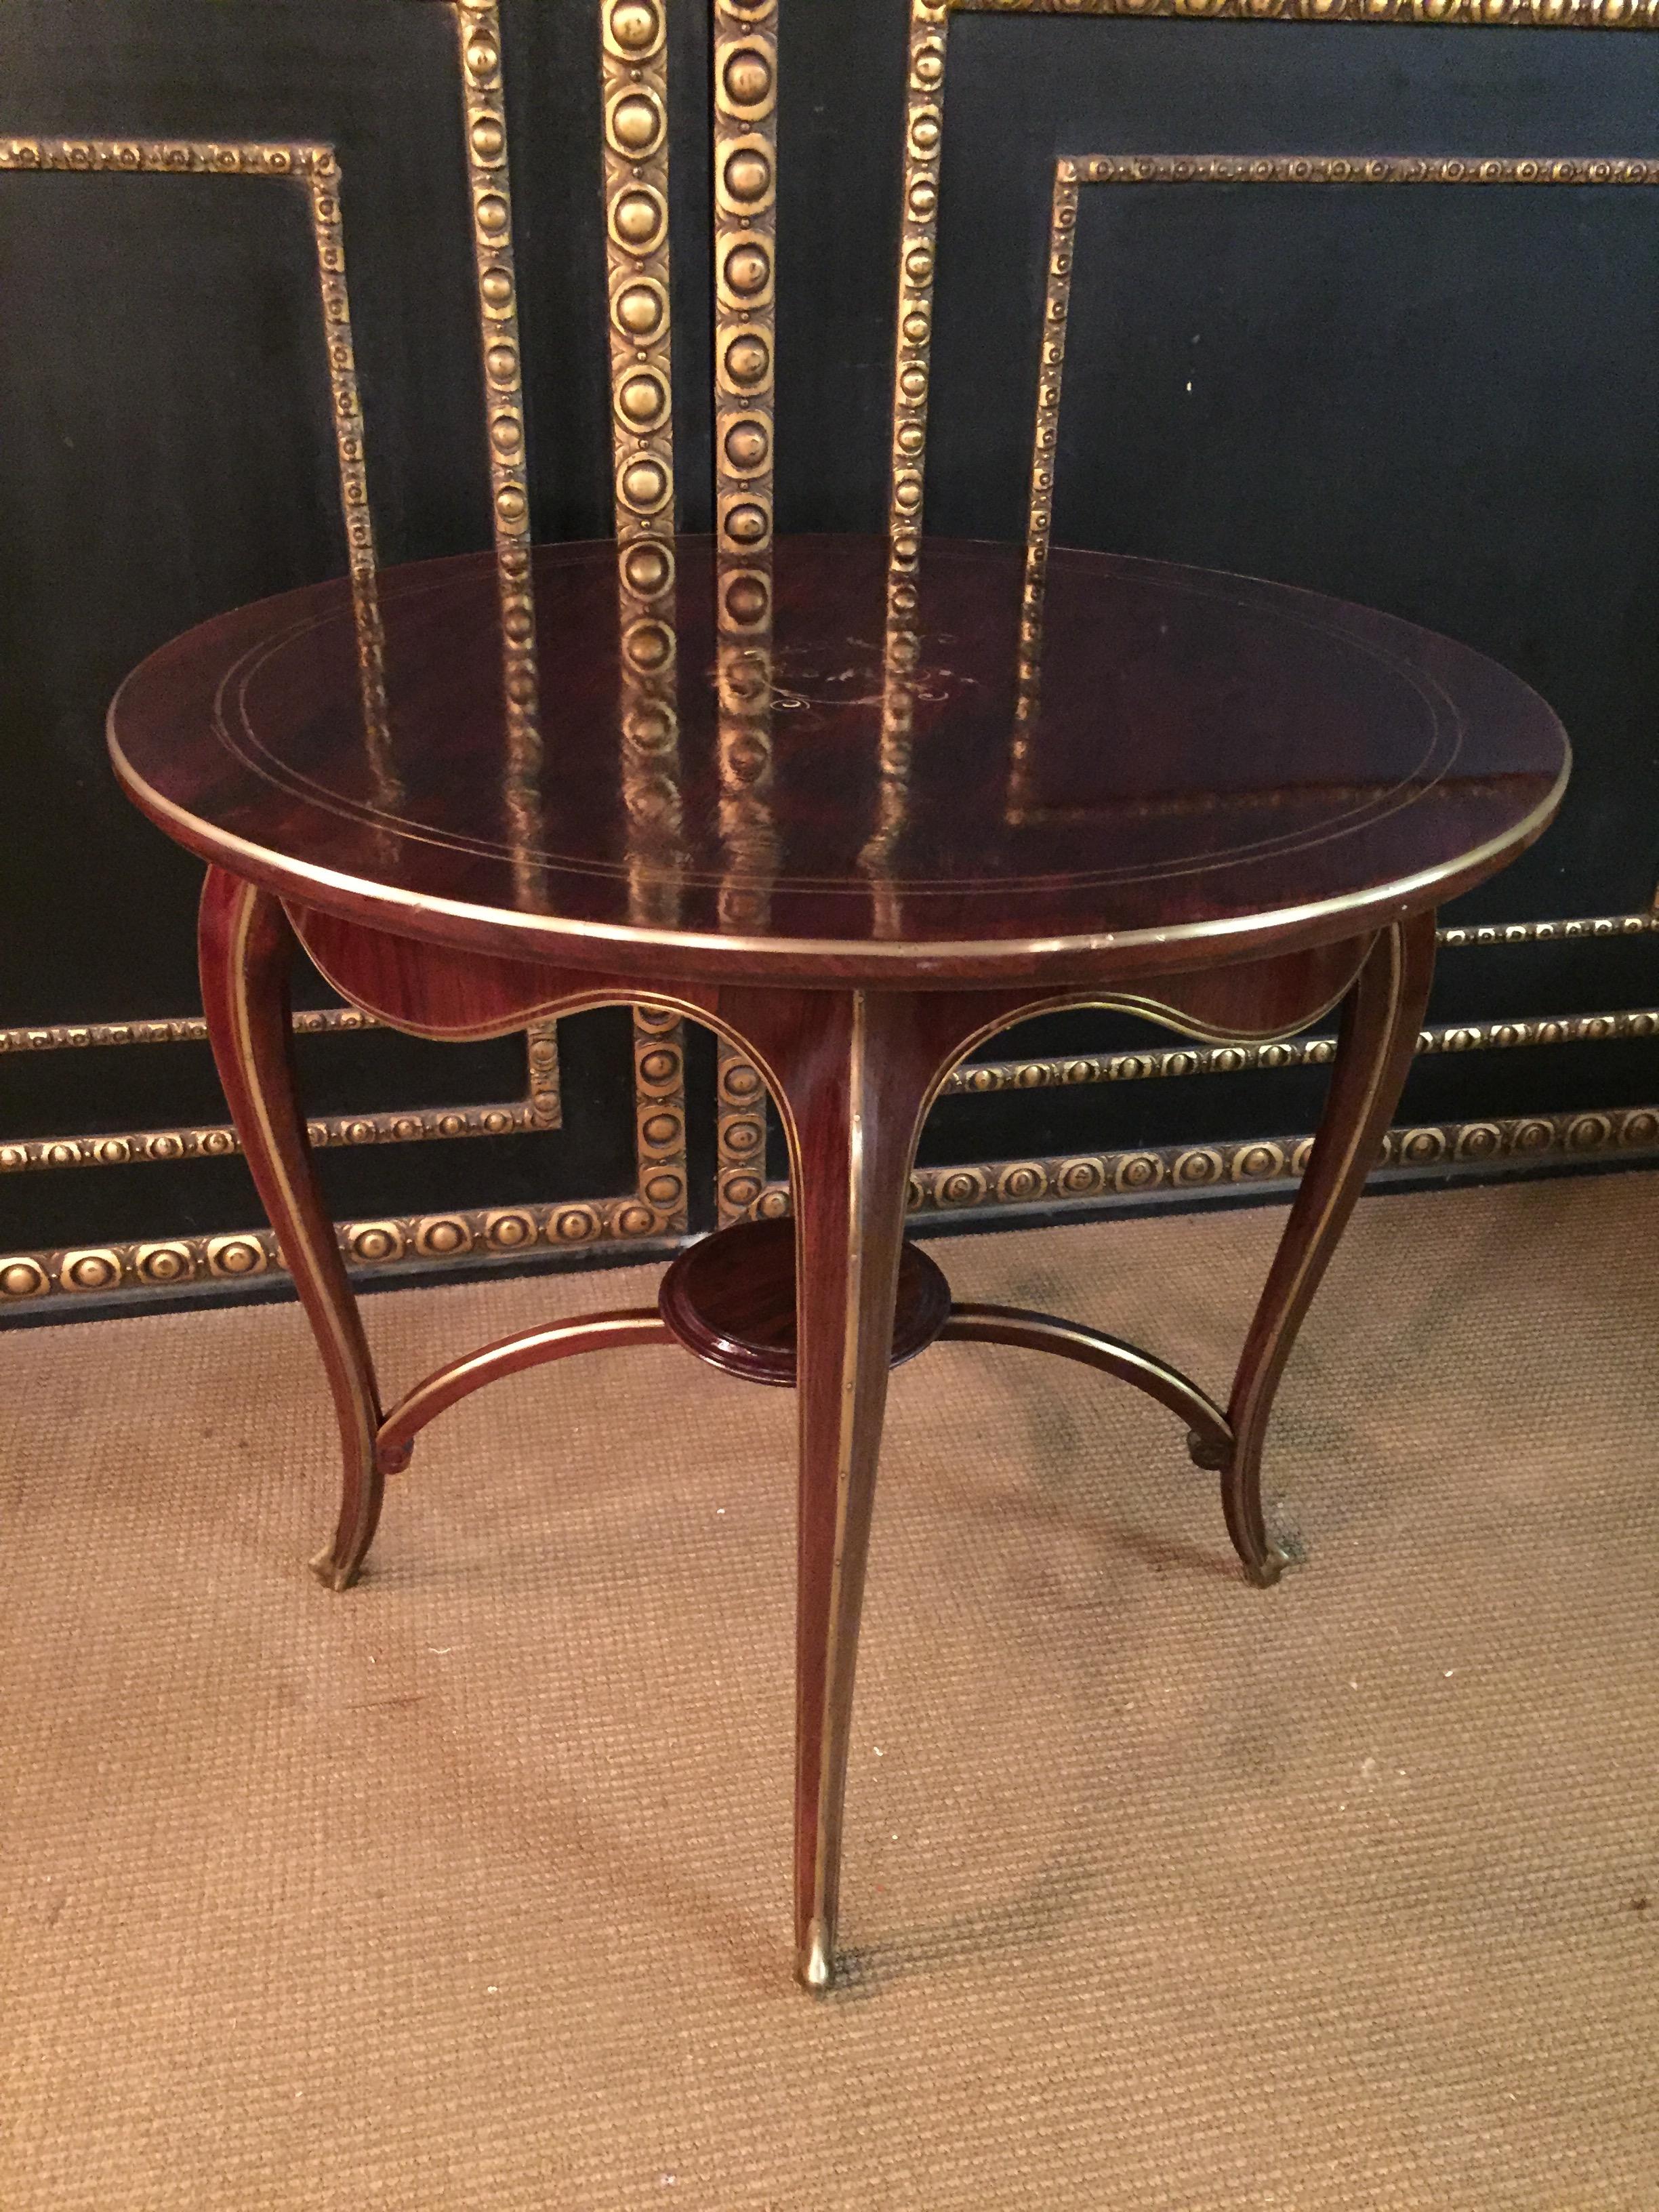 Antique Biedermeier Table Mahogany Inlaid with Mother of Pearl inlay 1870 For Sale 7